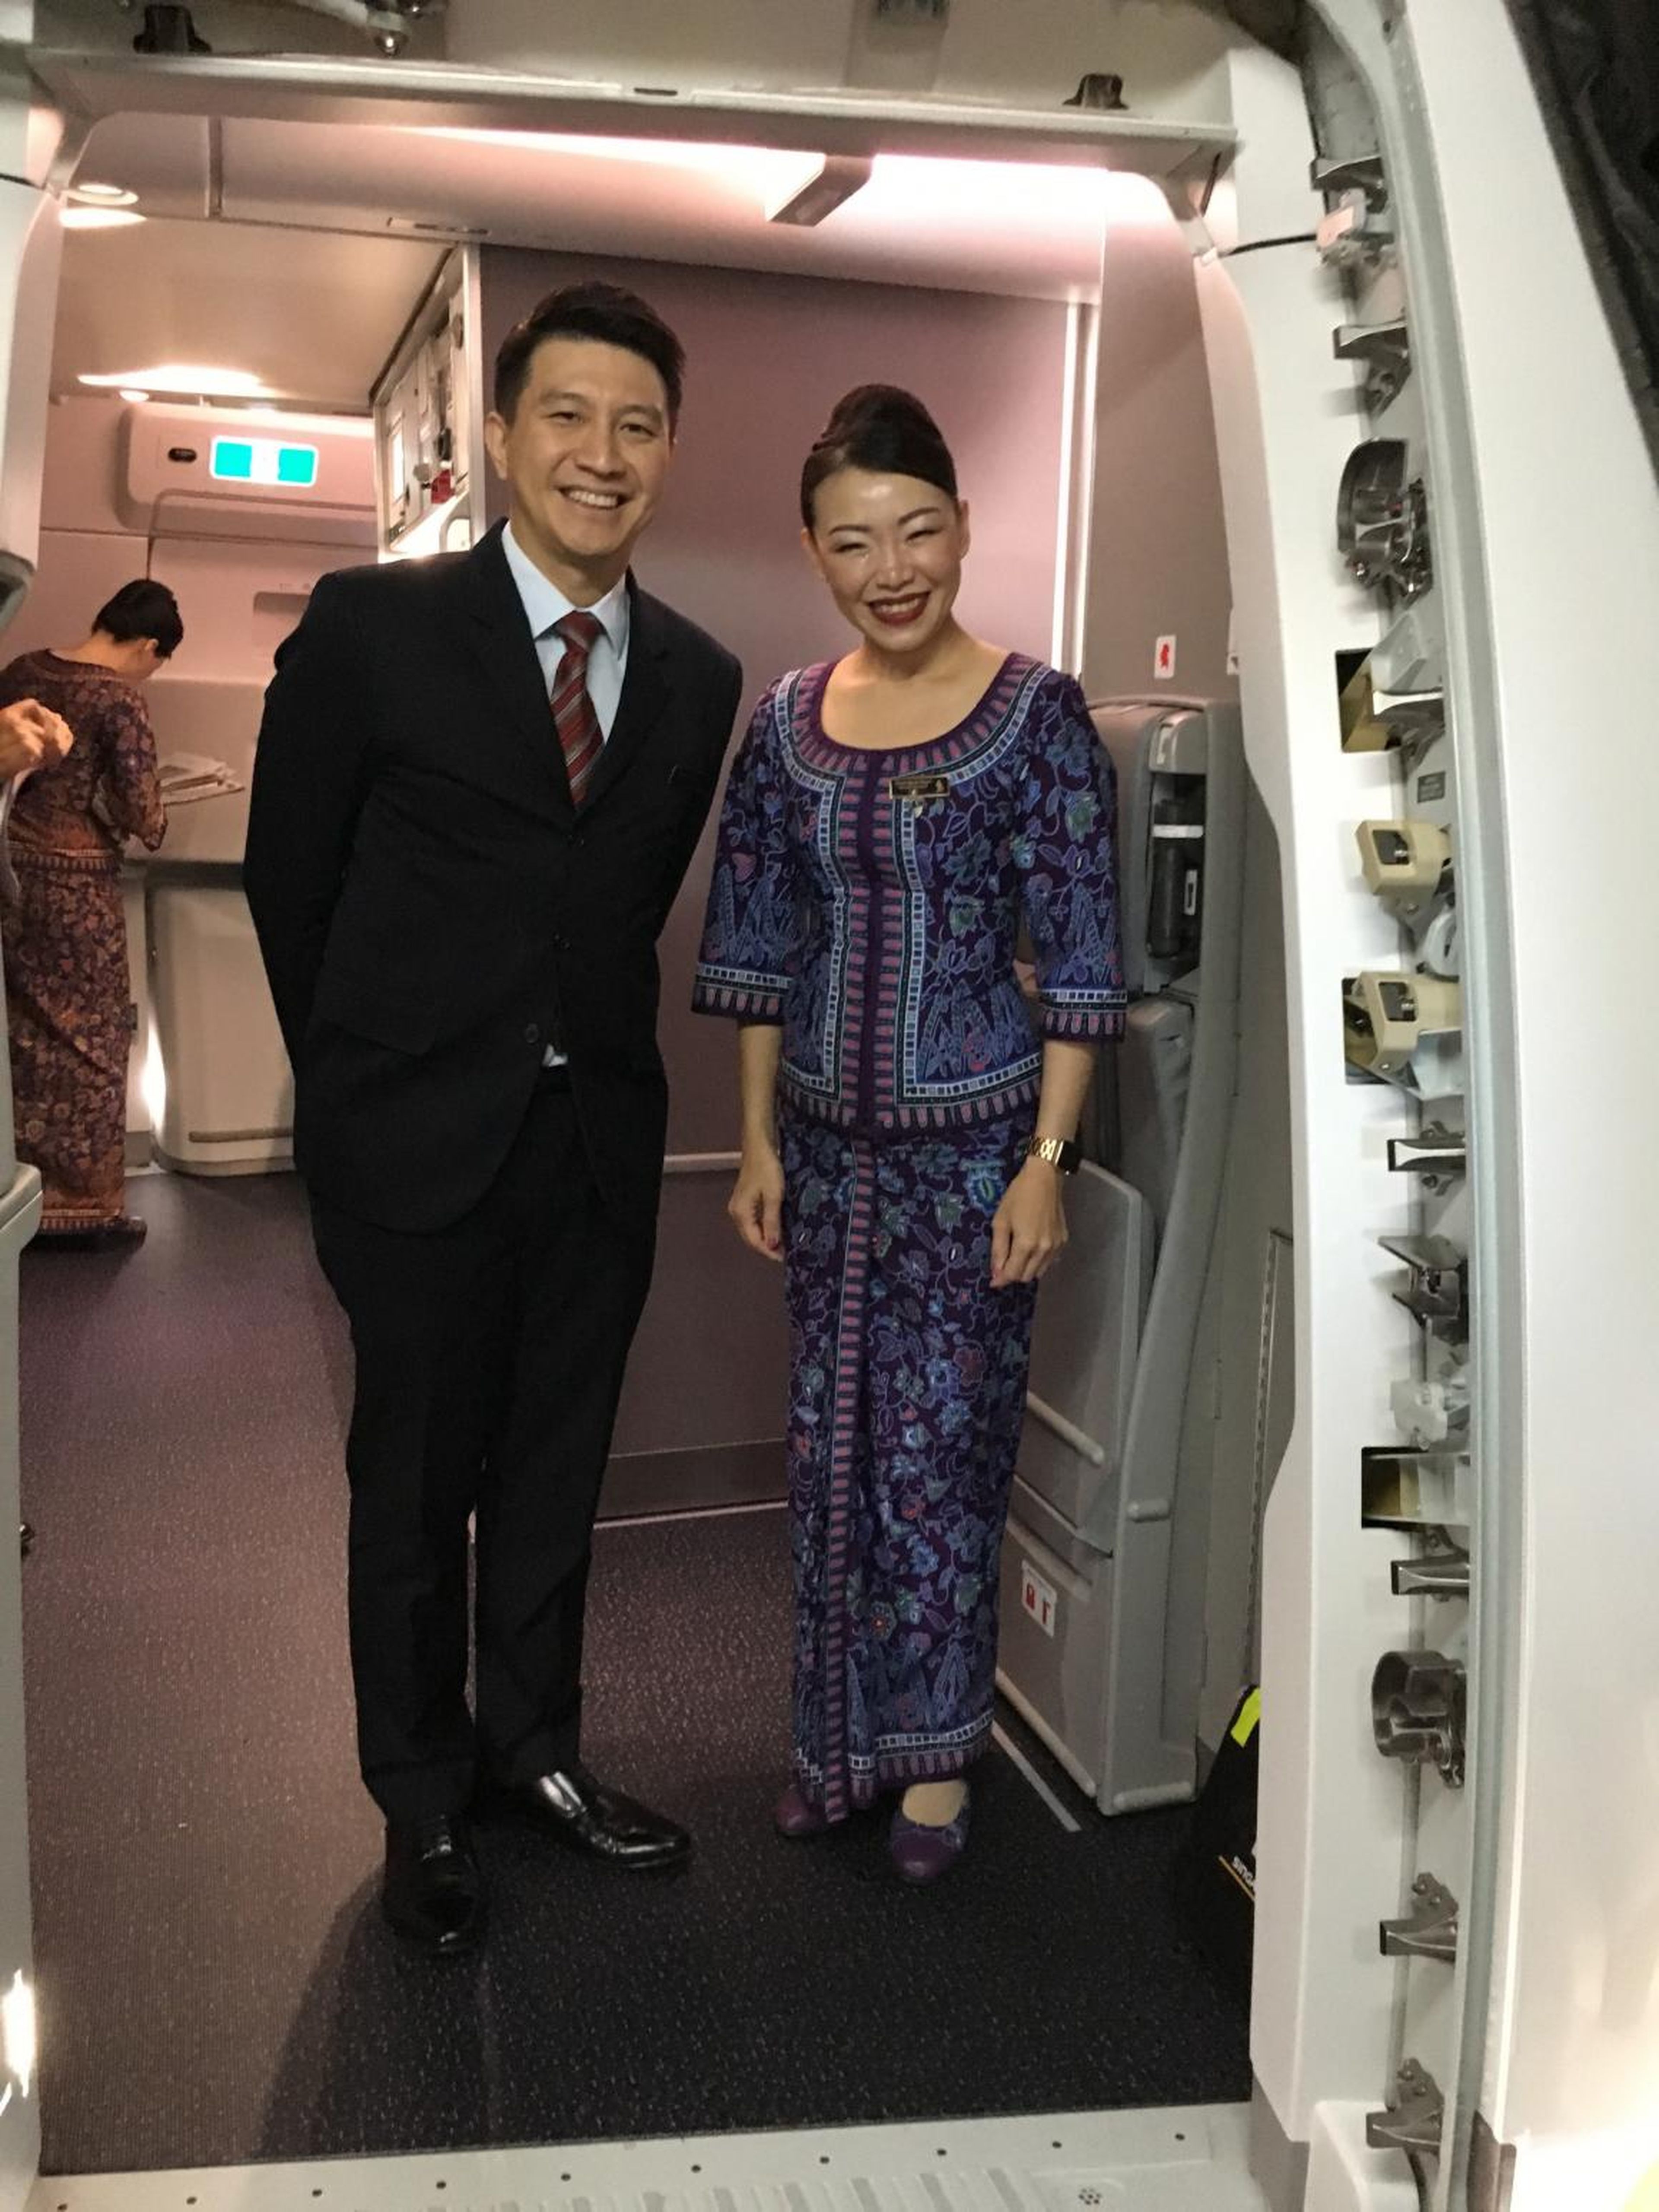 On each flight, we were greeted with a smile by Singapore's cabin crew.